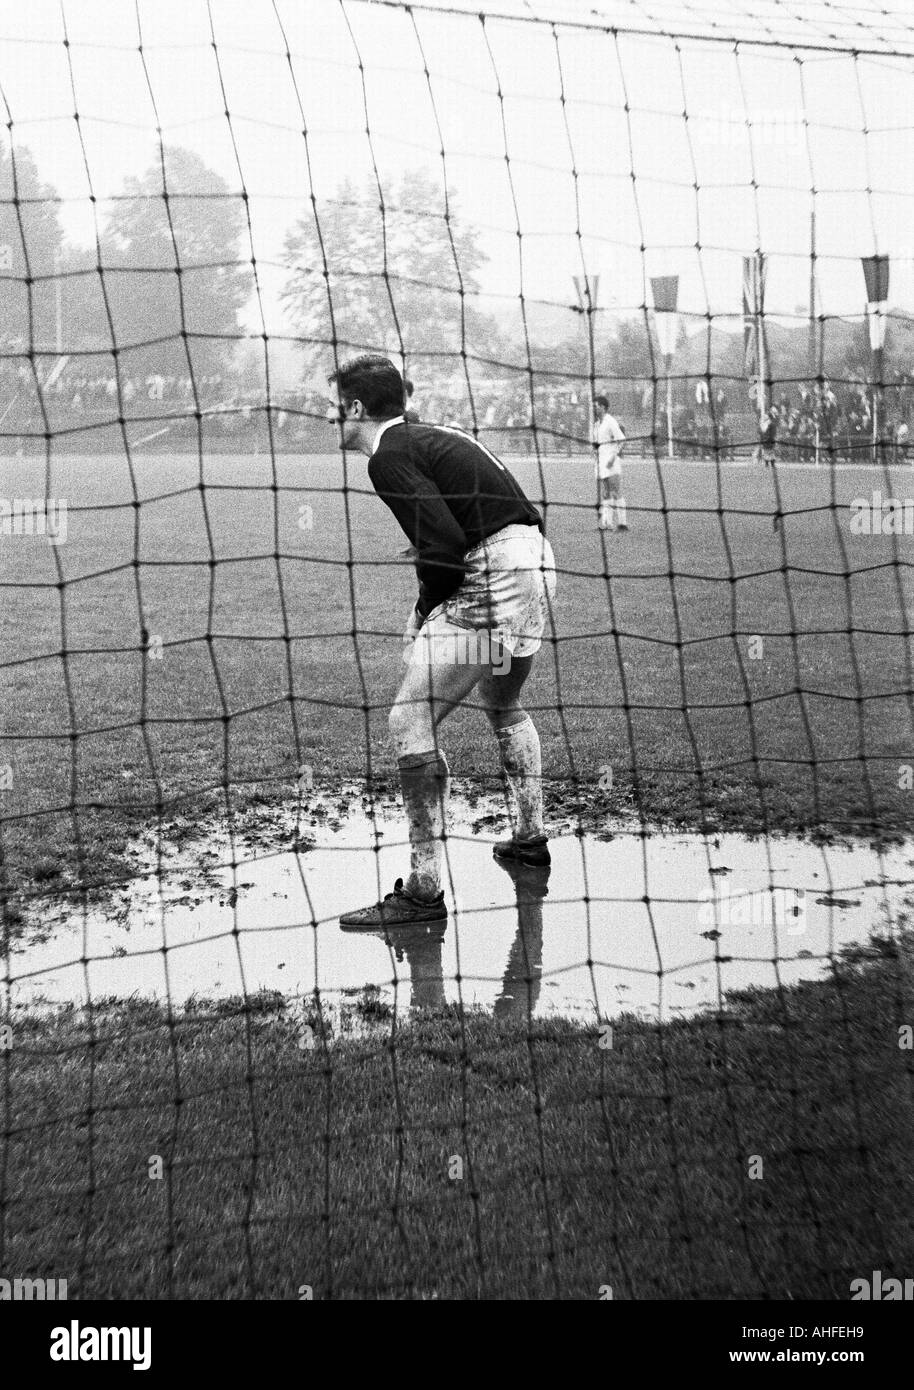 football, international junior class tournament 1965, Roter Stern Belgrade versus VfL Bochum 4:2, Stadium an der Castroper Strasse in Bochum, scene of the match, keeper of Bochum stands in a puddle of water Stock Photo